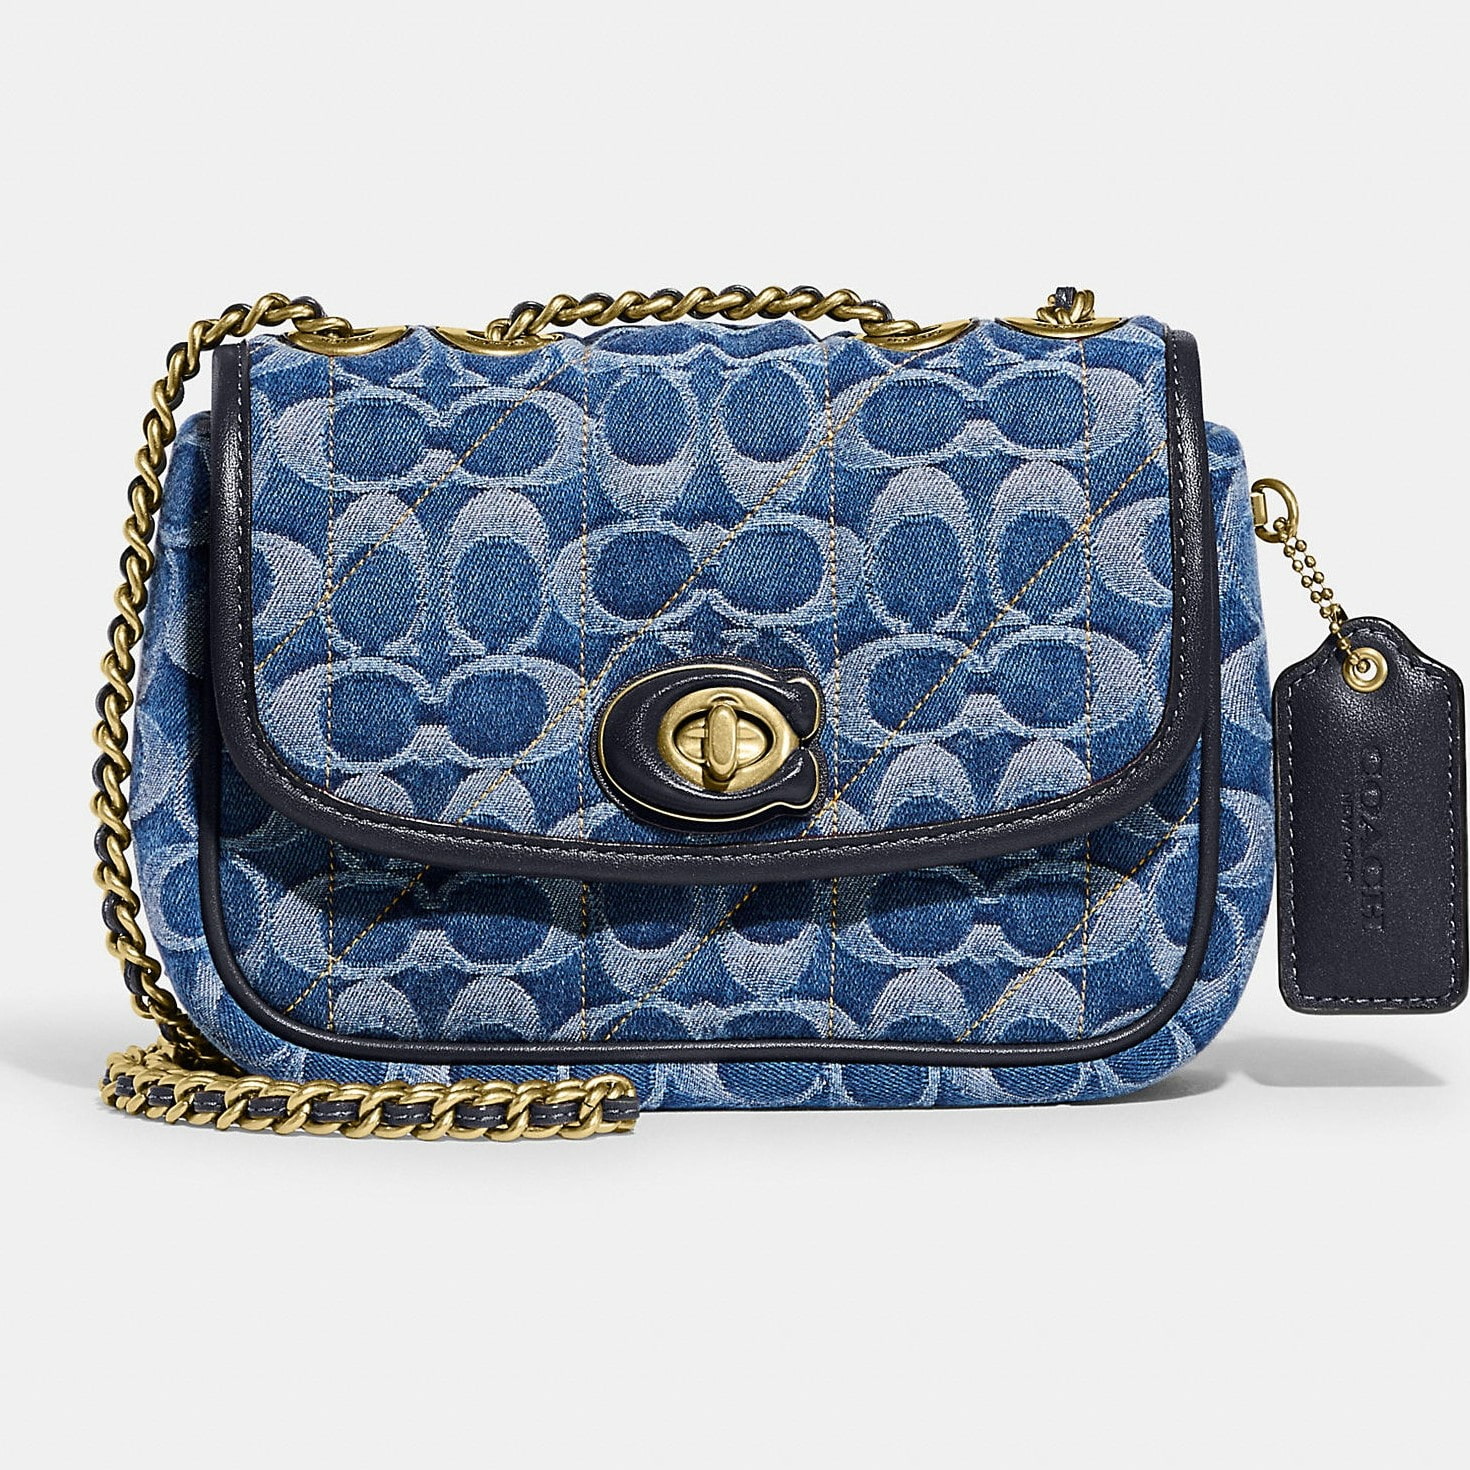 TÚI ĐEO CHÉO COACH PILLOW MADISON SHOULDER BAG 18 IN SIGNAUTURE DENIM WITH QUILTING 4